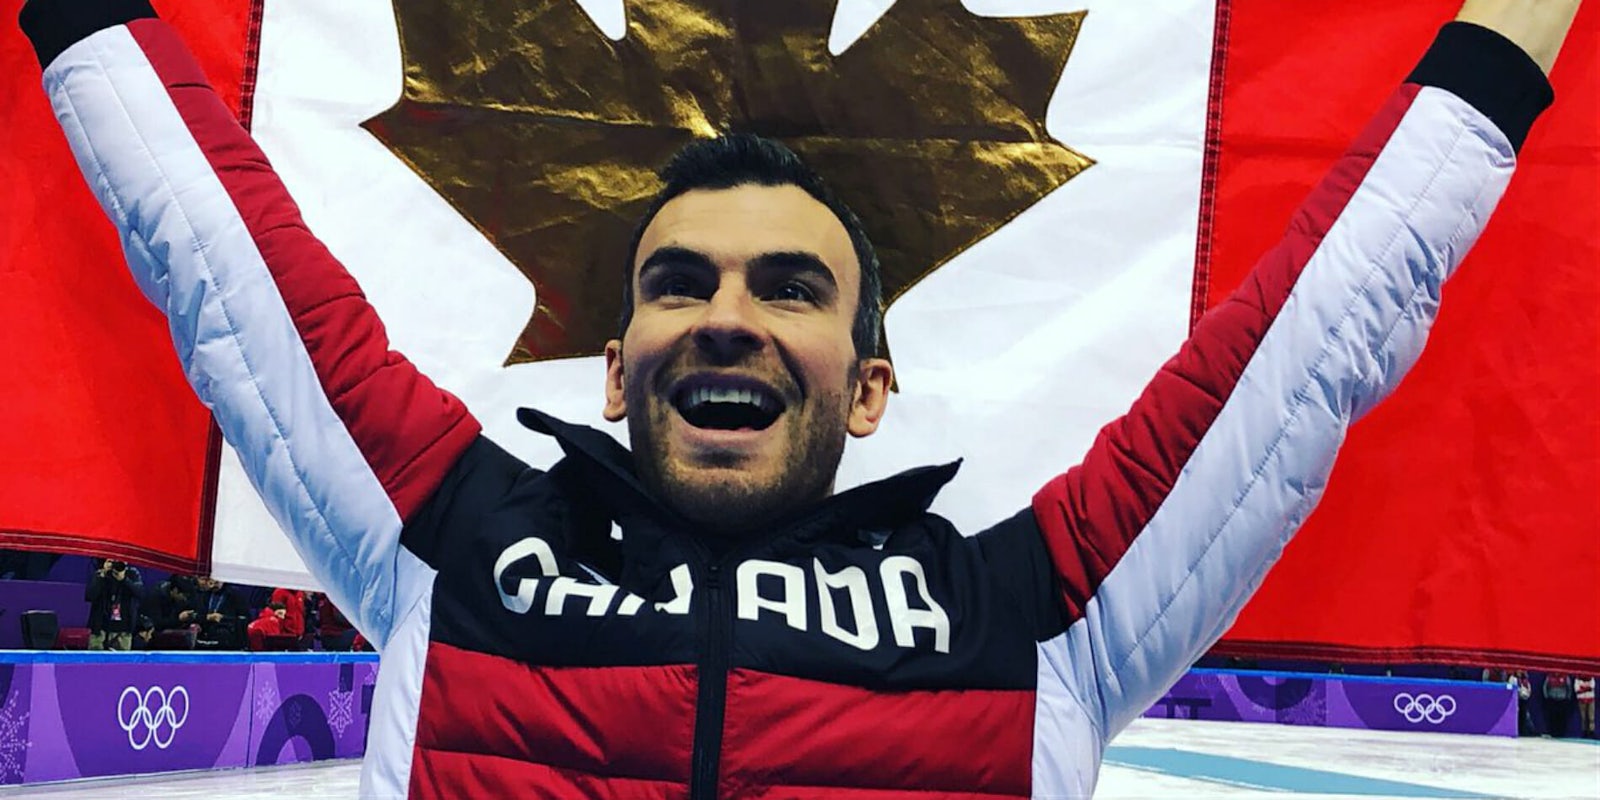 Eric Radford became the first openly gay Winter Olympian to win gold.